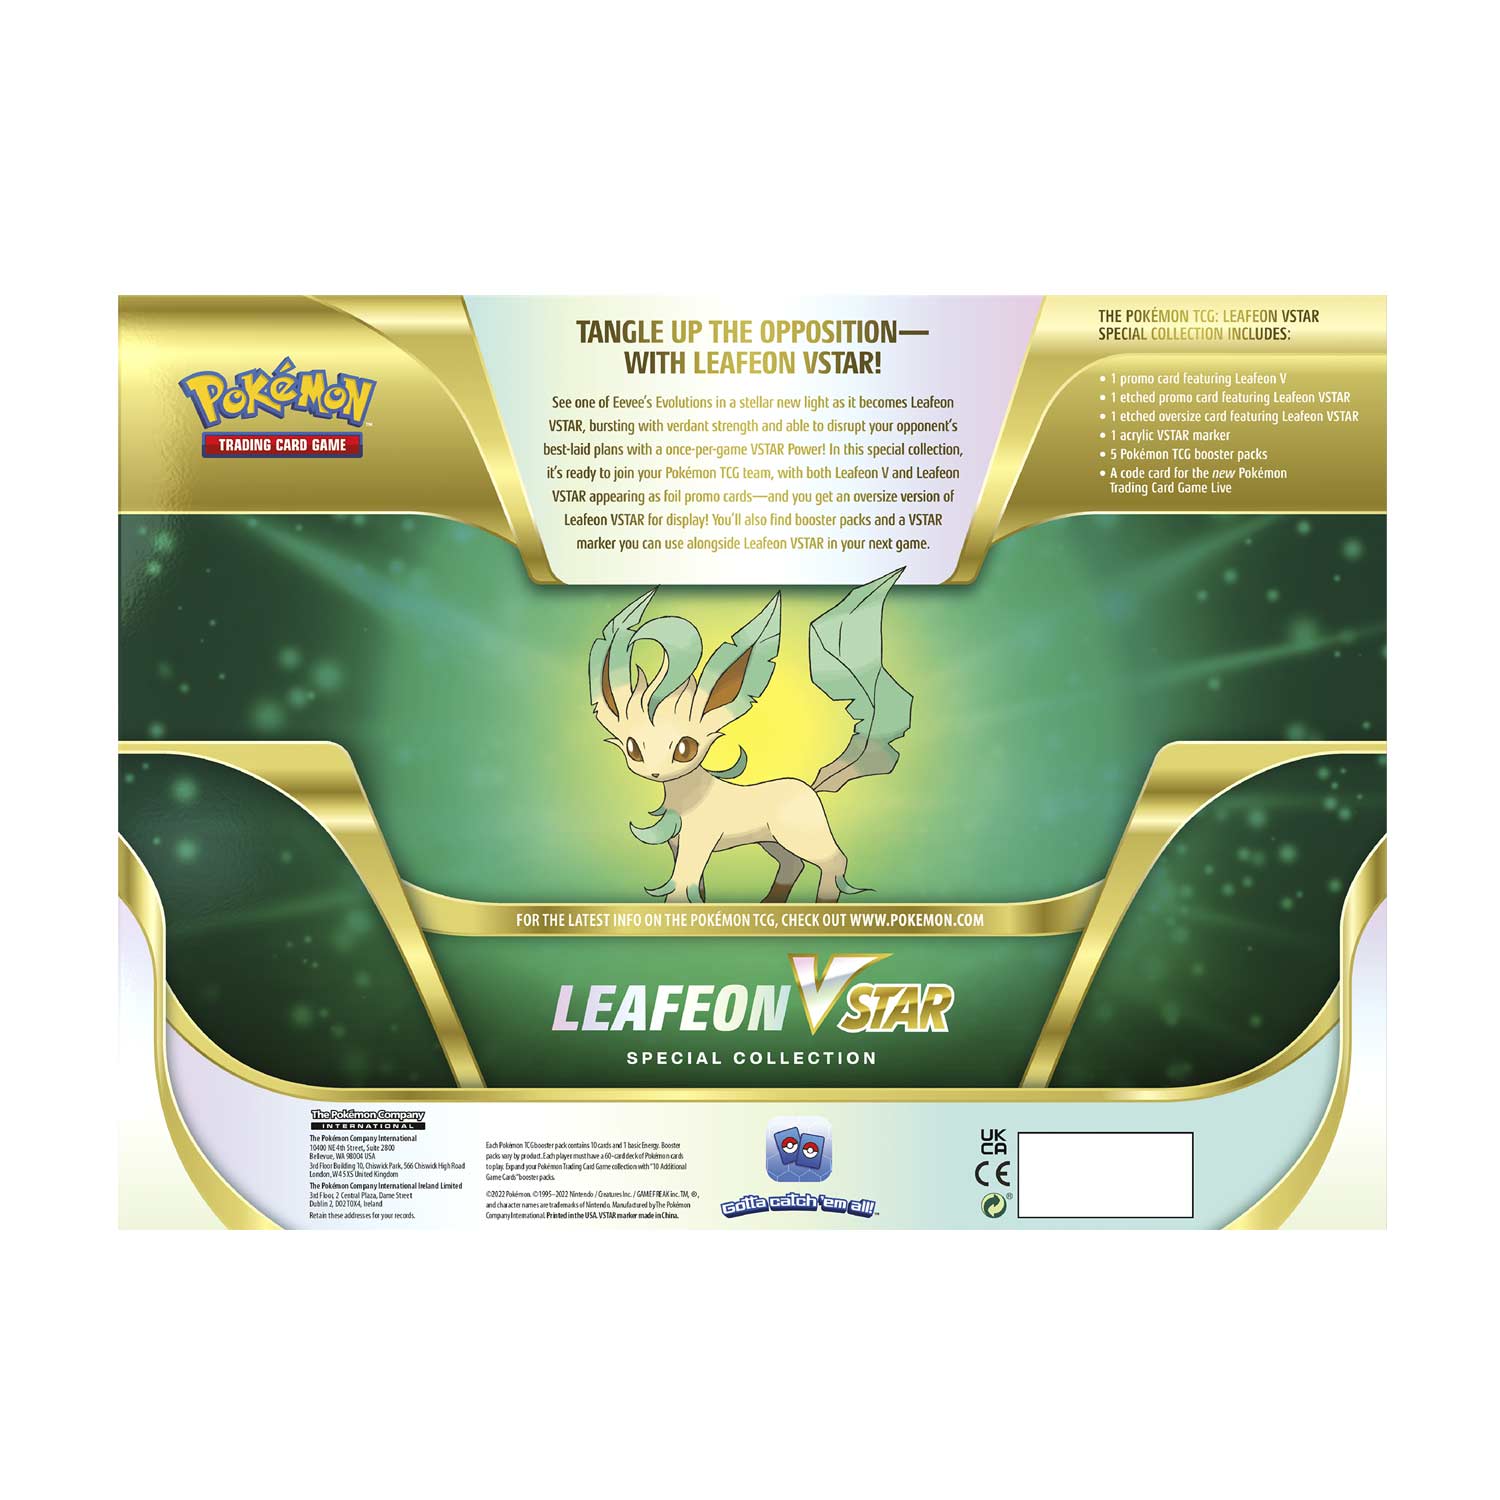 by email Leafeon VSTAR Special Collection Online Promo Code Pokemon